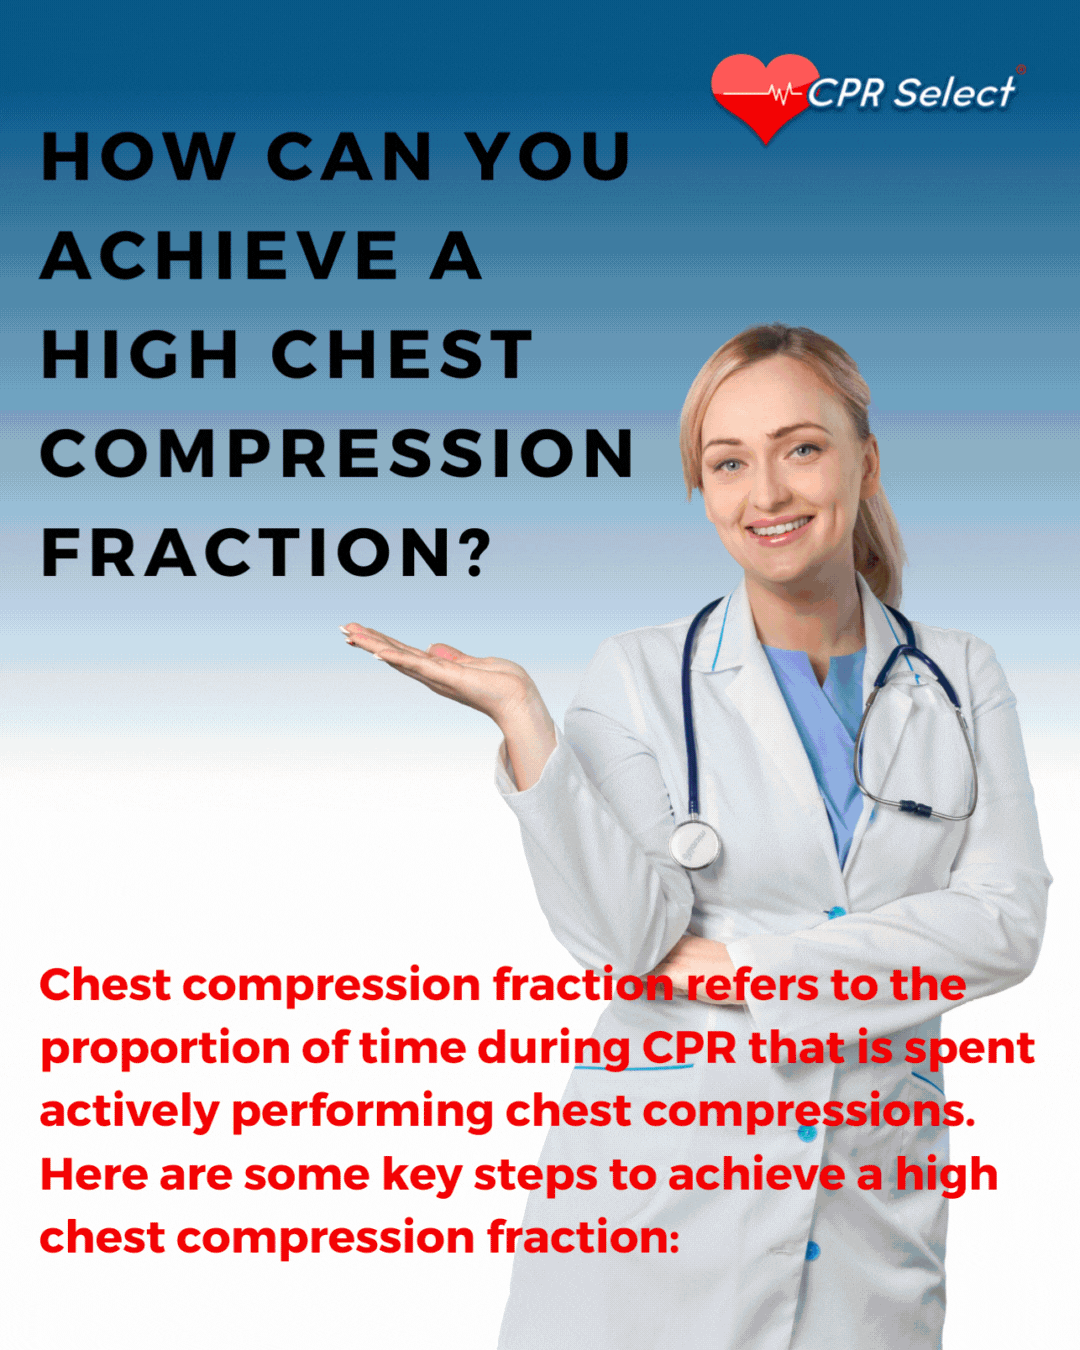 How Can You Achieve a High Chest Compression Fraction